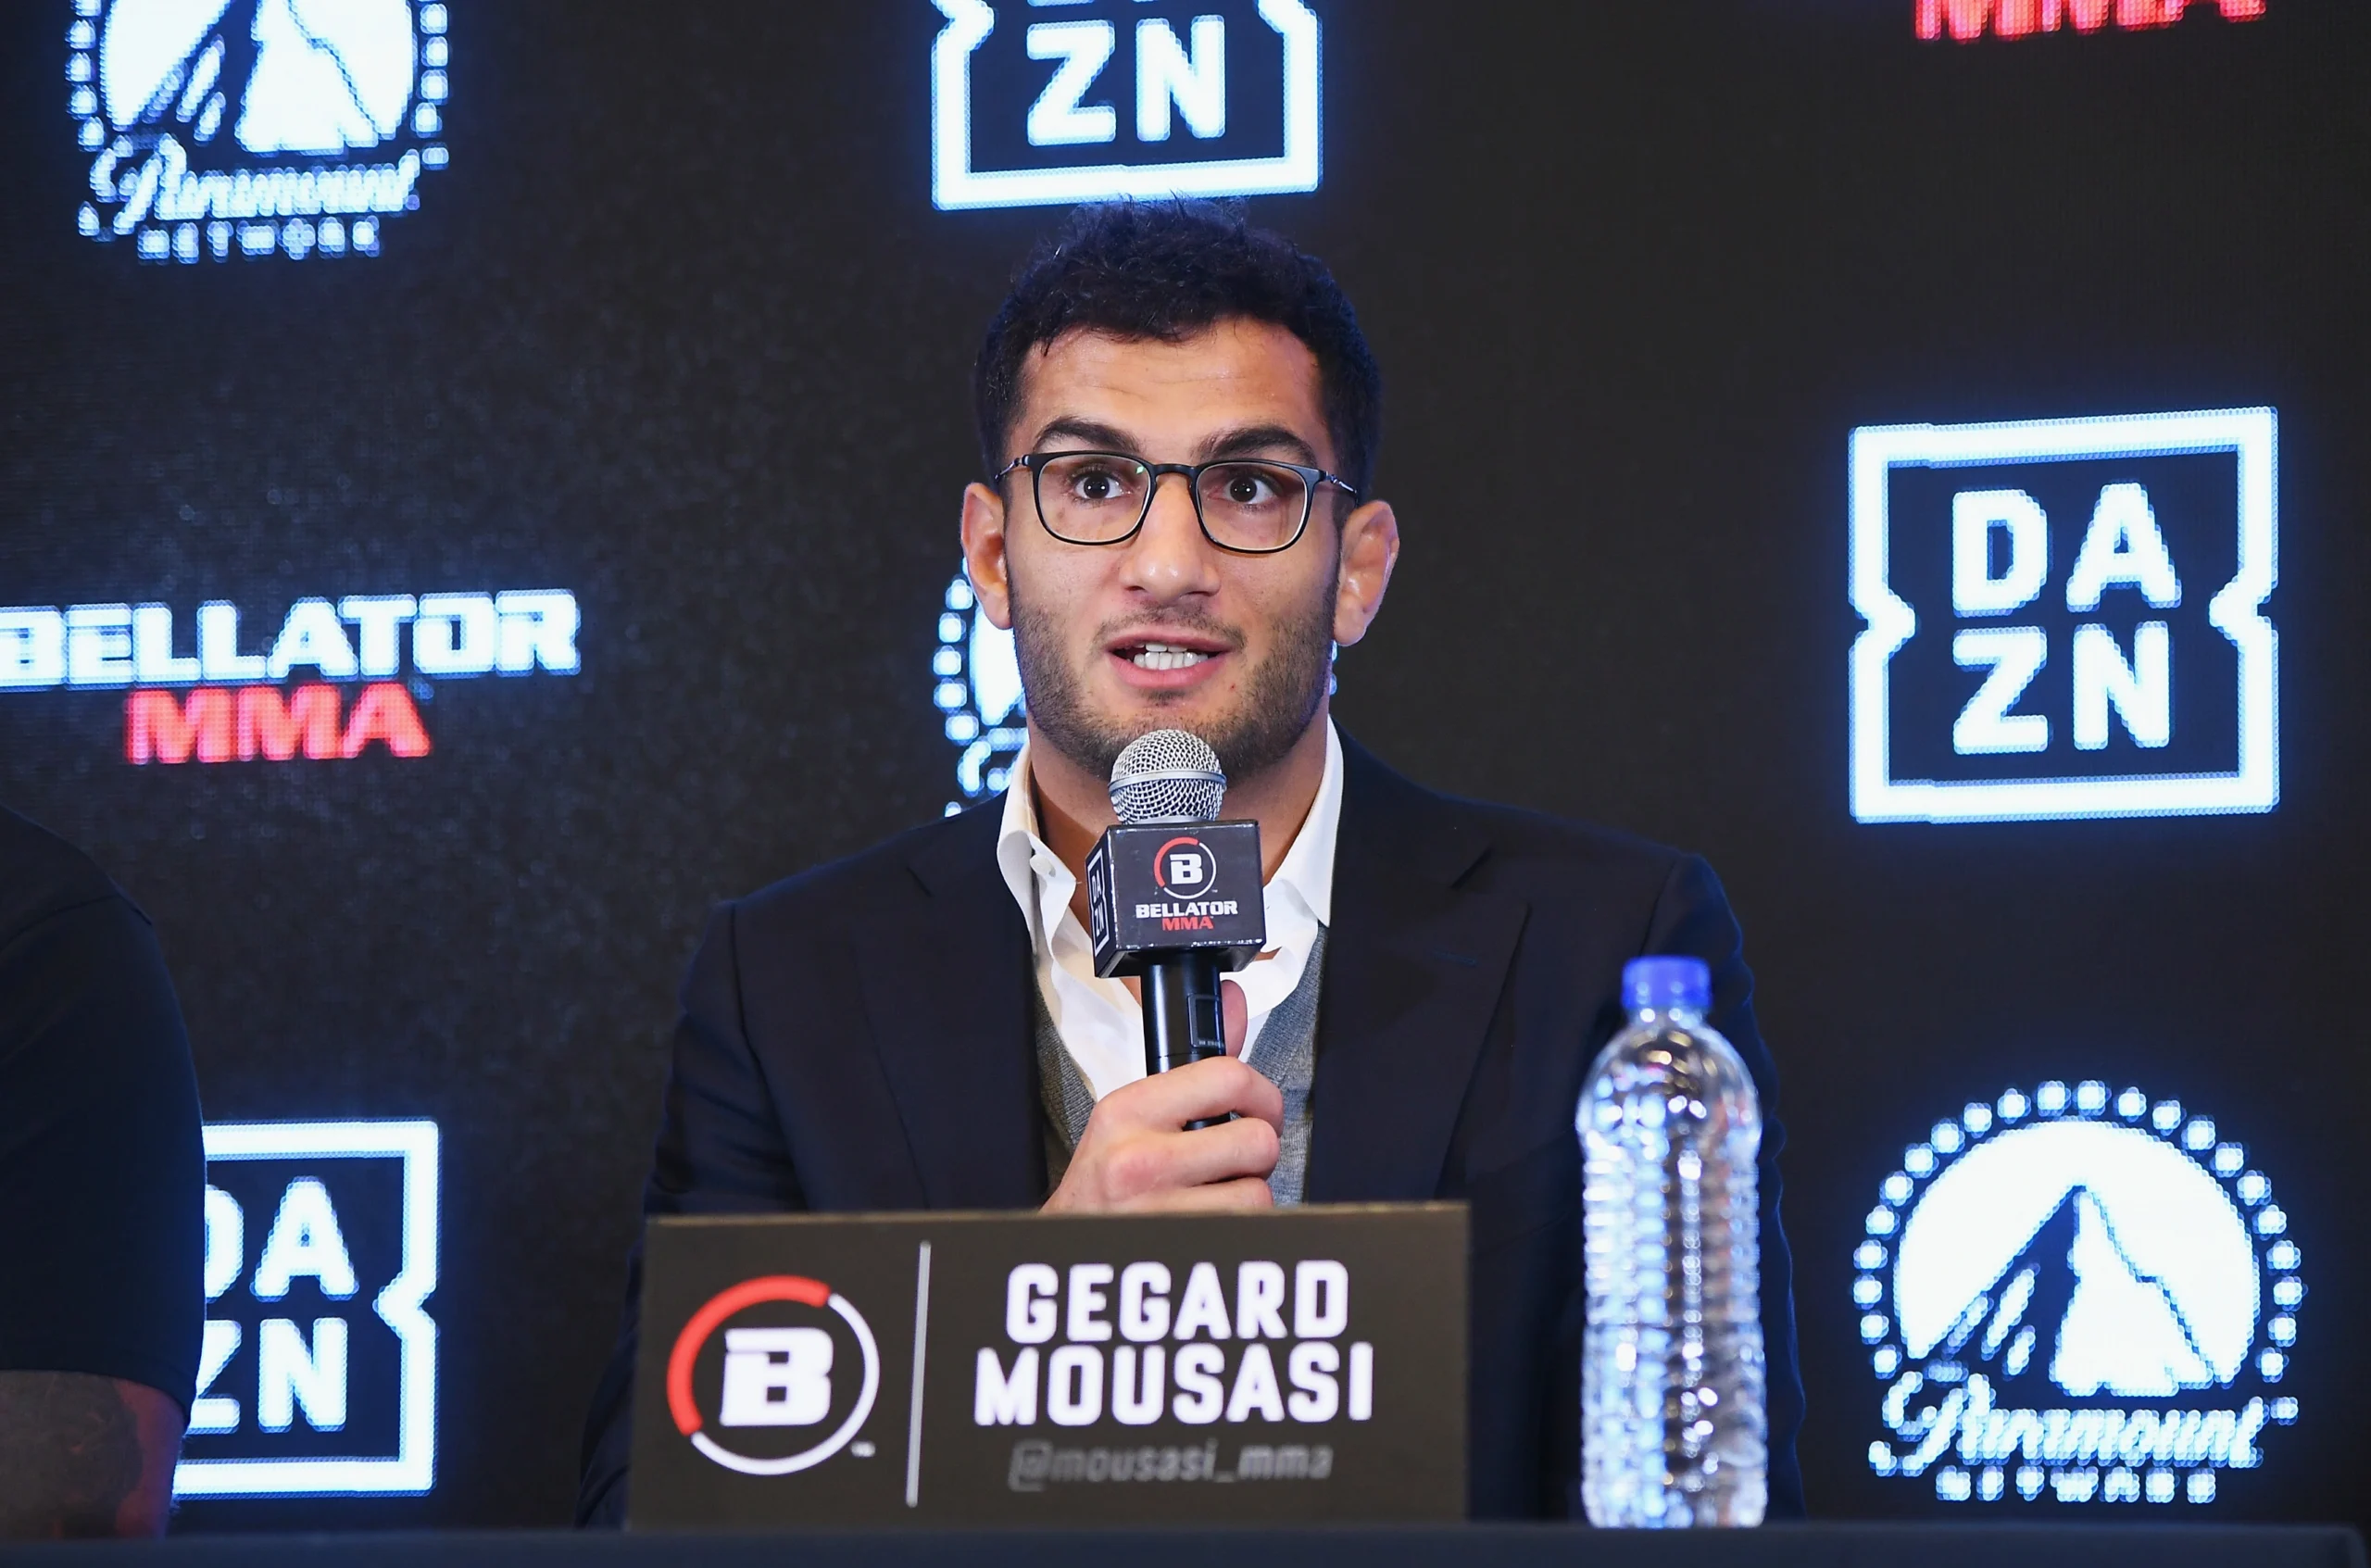 Gegard Mousasi voices frustration over PFL’s communication gap: “They don’t promote me, or people think I’m retired”